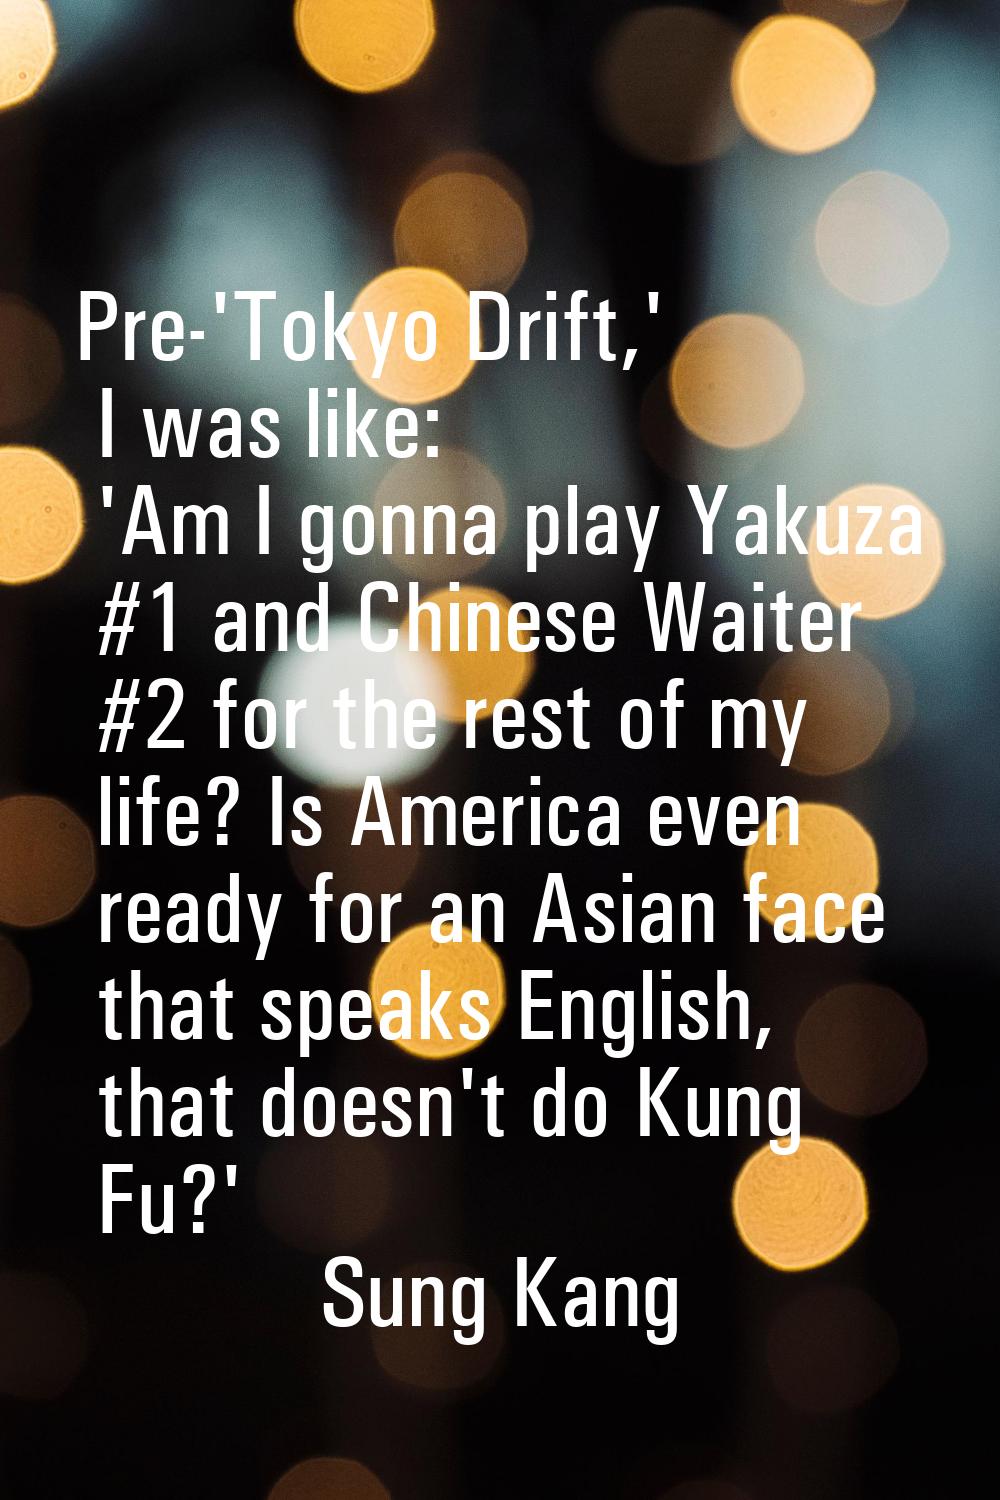 Pre-'Tokyo Drift,' I was like: 'Am I gonna play Yakuza #1 and Chinese Waiter #2 for the rest of my 